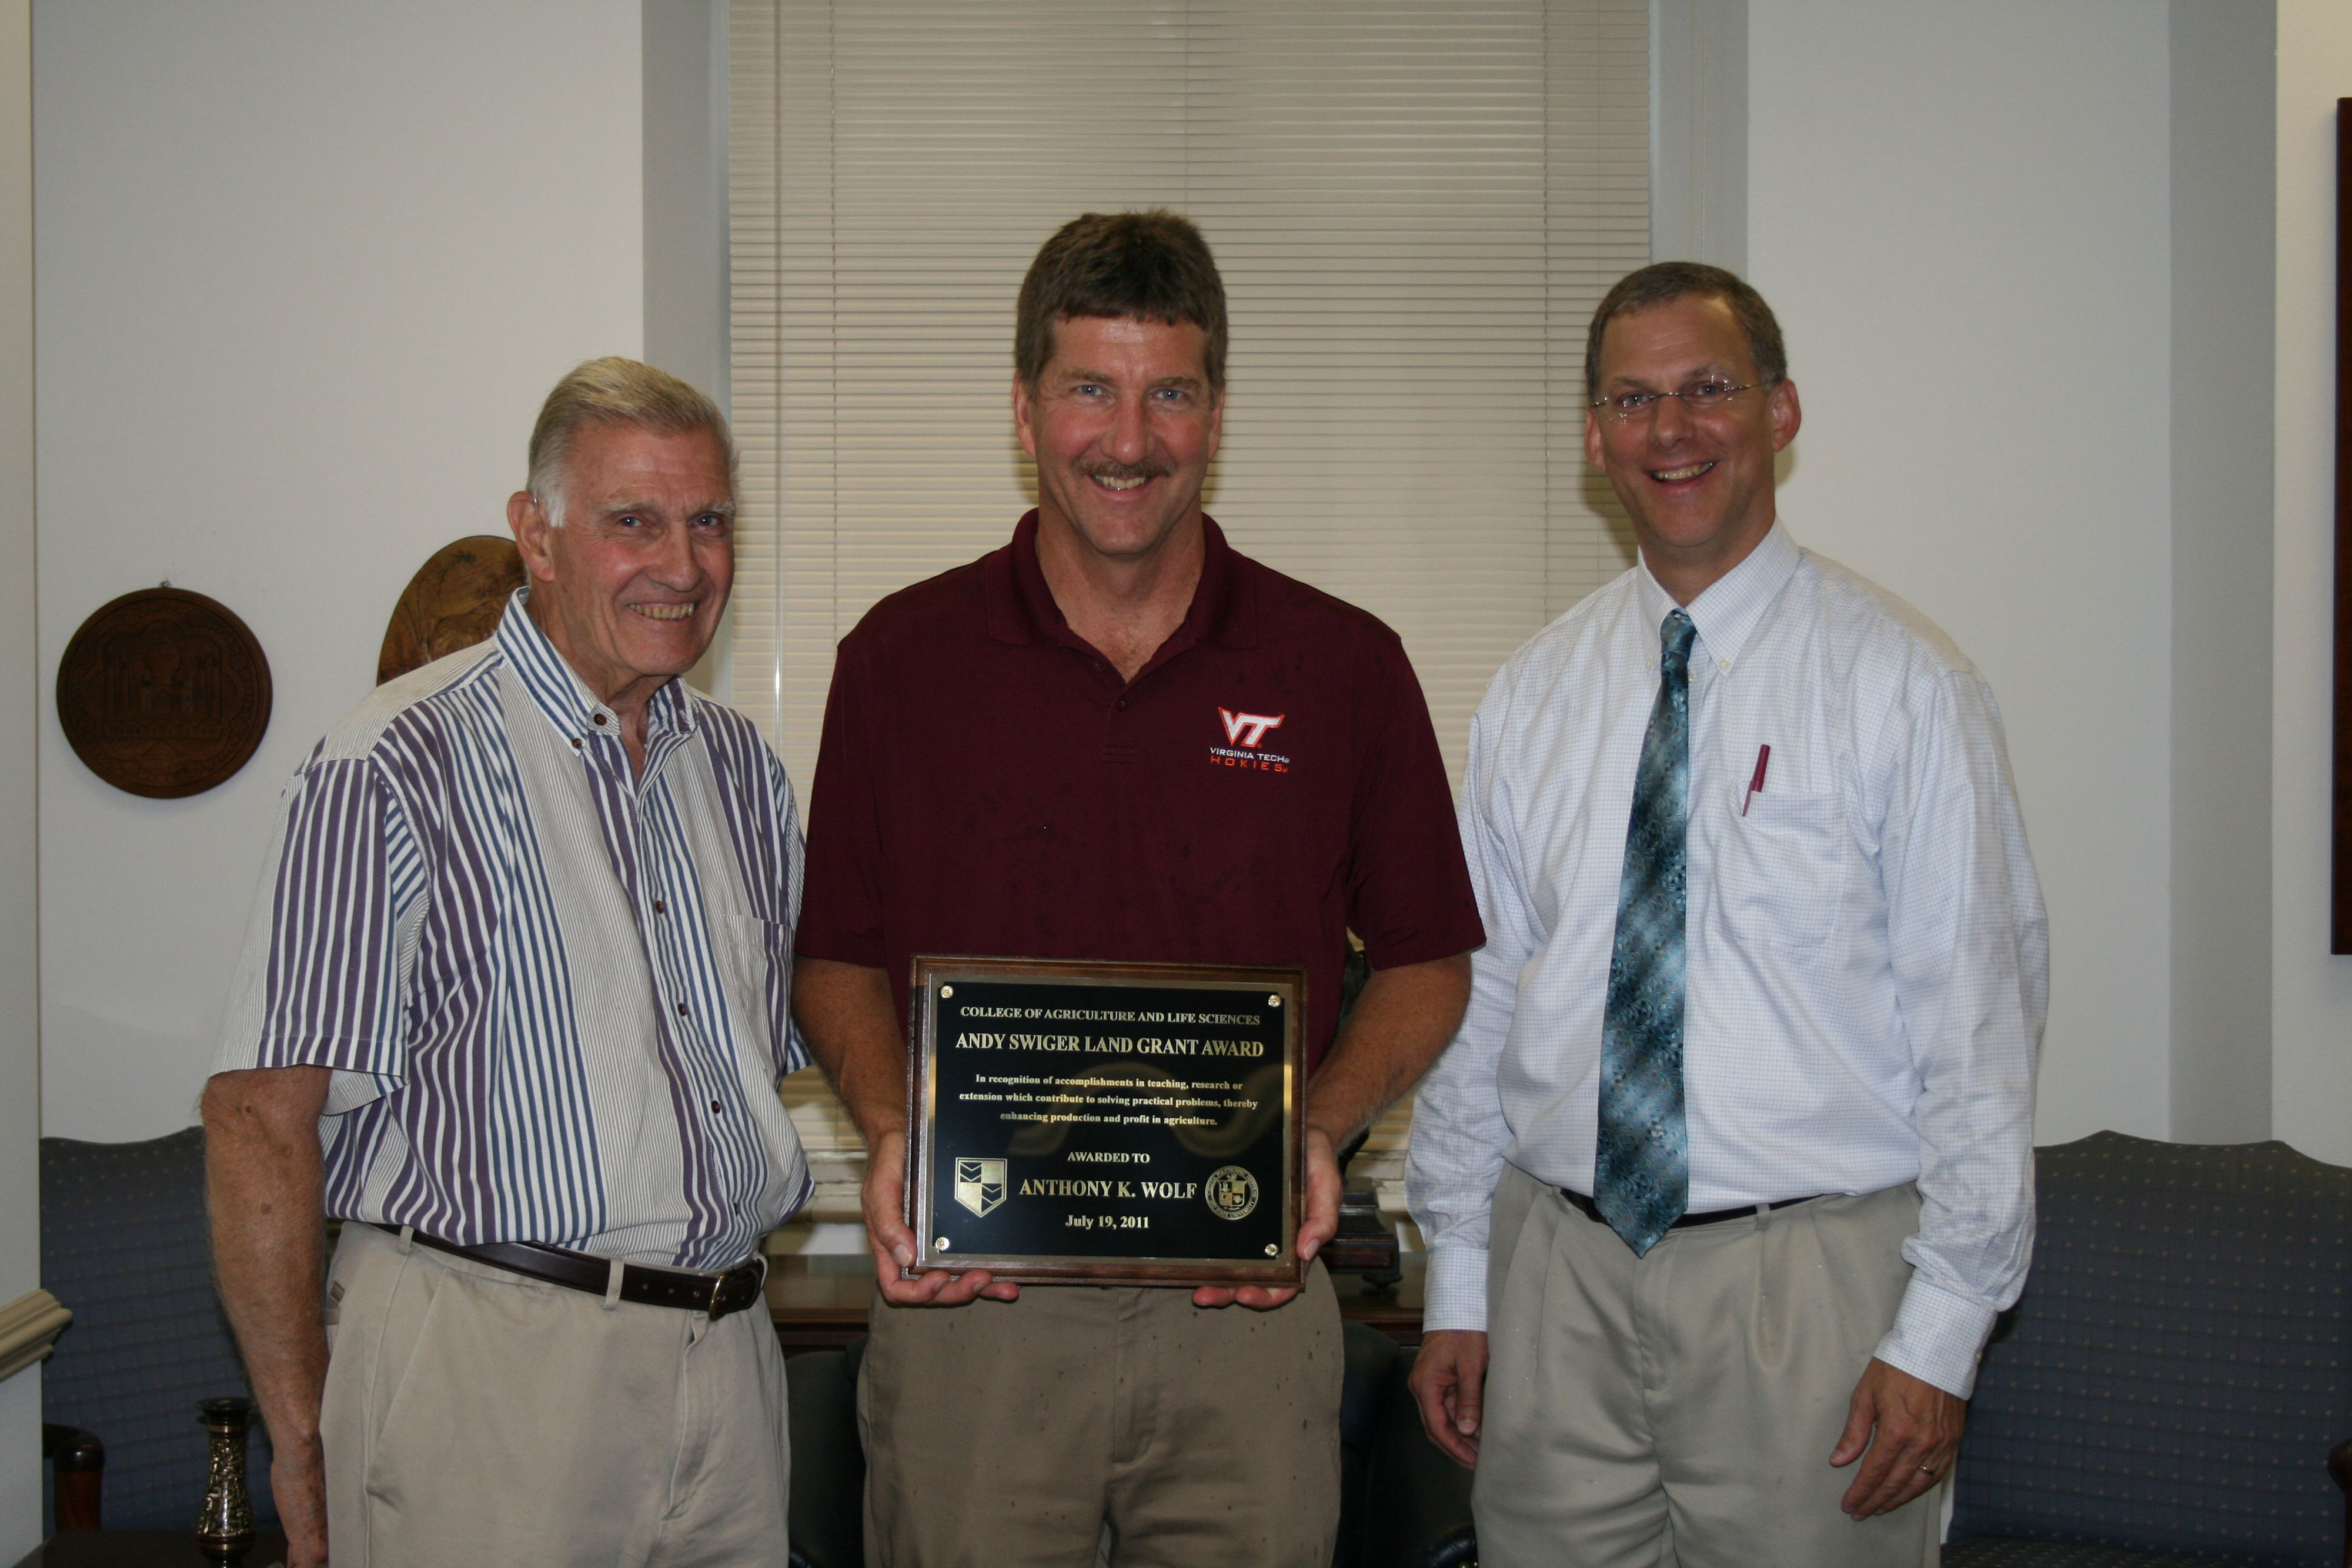 Tony Wolf (center), professor of horticulture and director of the Alson H. Smith Jr. AREC, receives the 2011 Swiger Land-Grant Award from Dean Emeritus Andy Swiger, (left) and Alan Grant, dean.